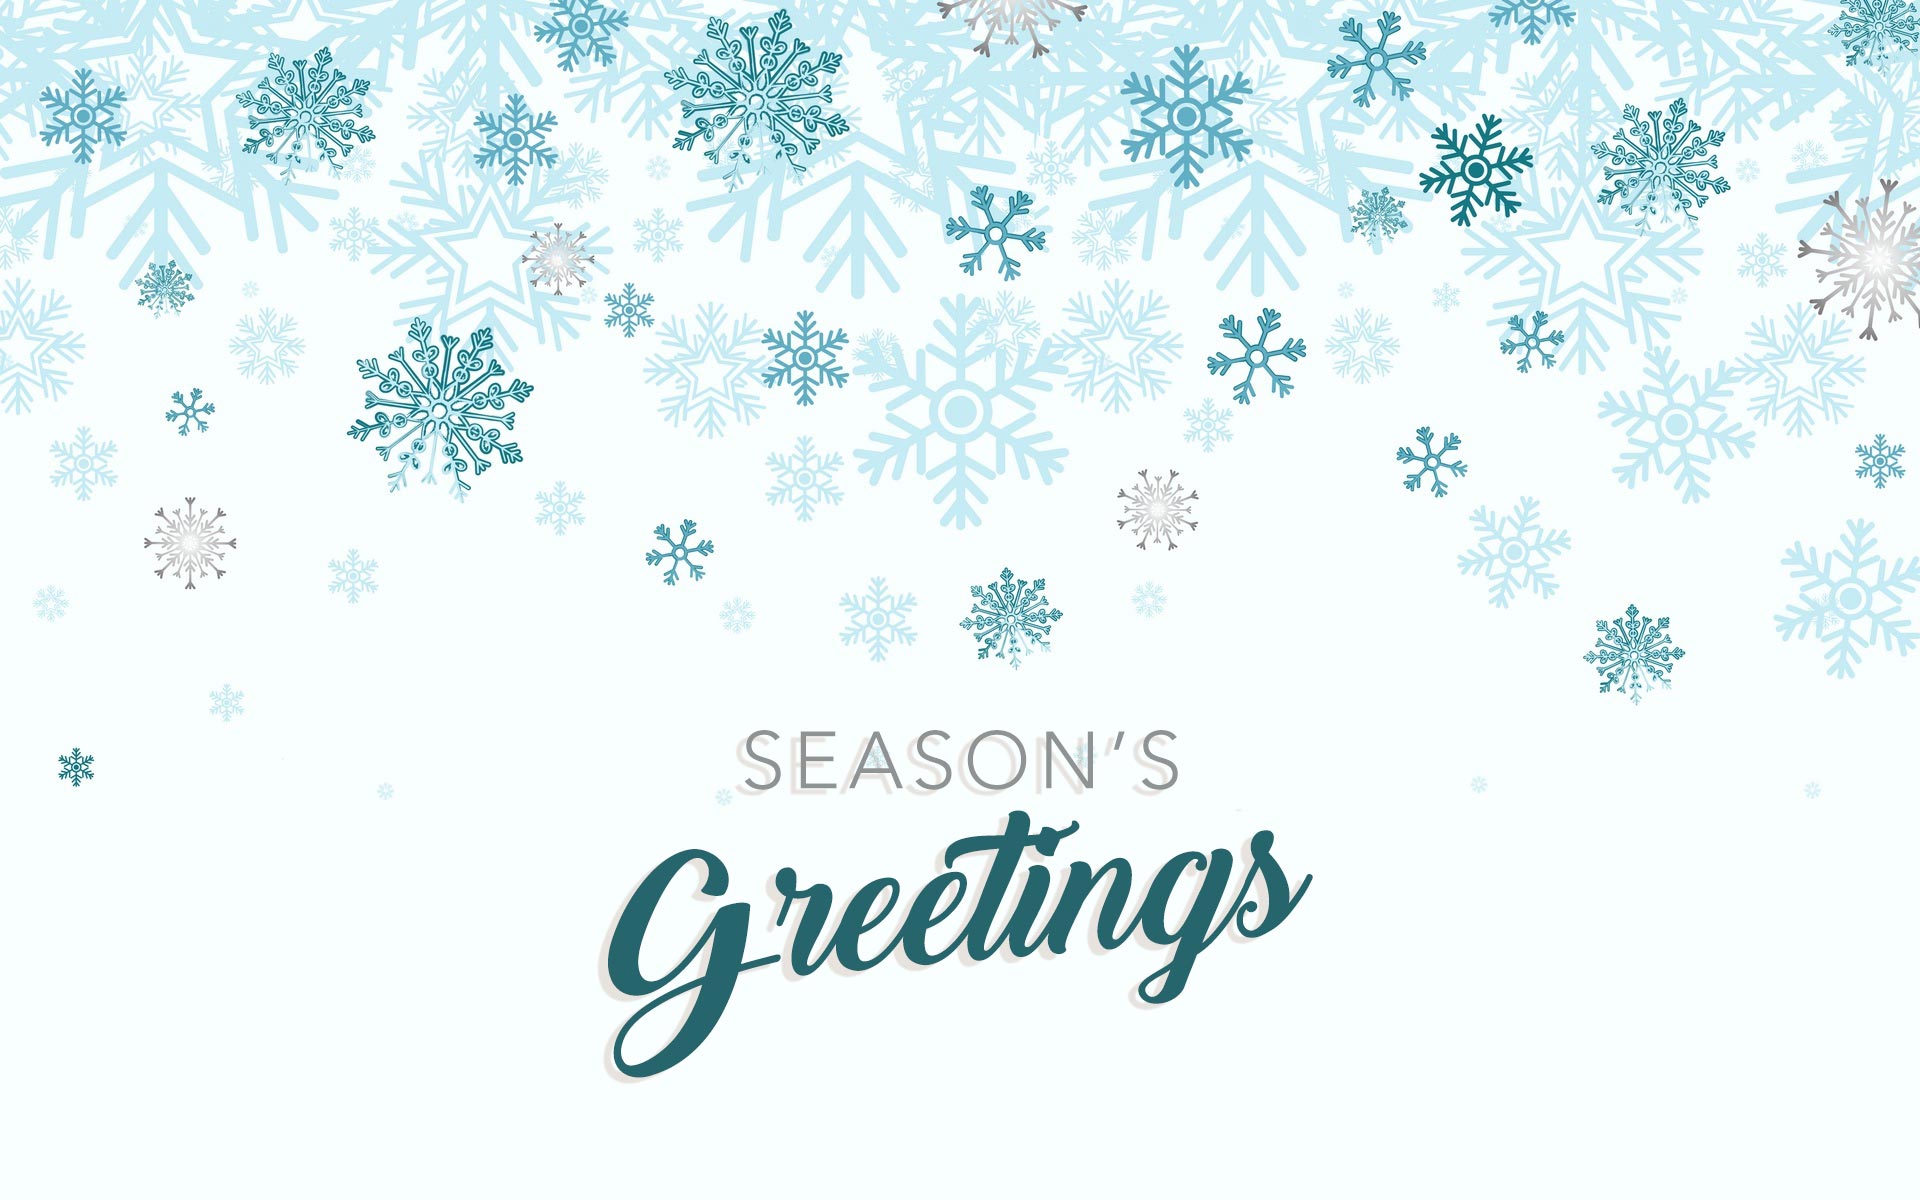  download 15 Seasons Greetings Cards Stock Images HD 1920x1200